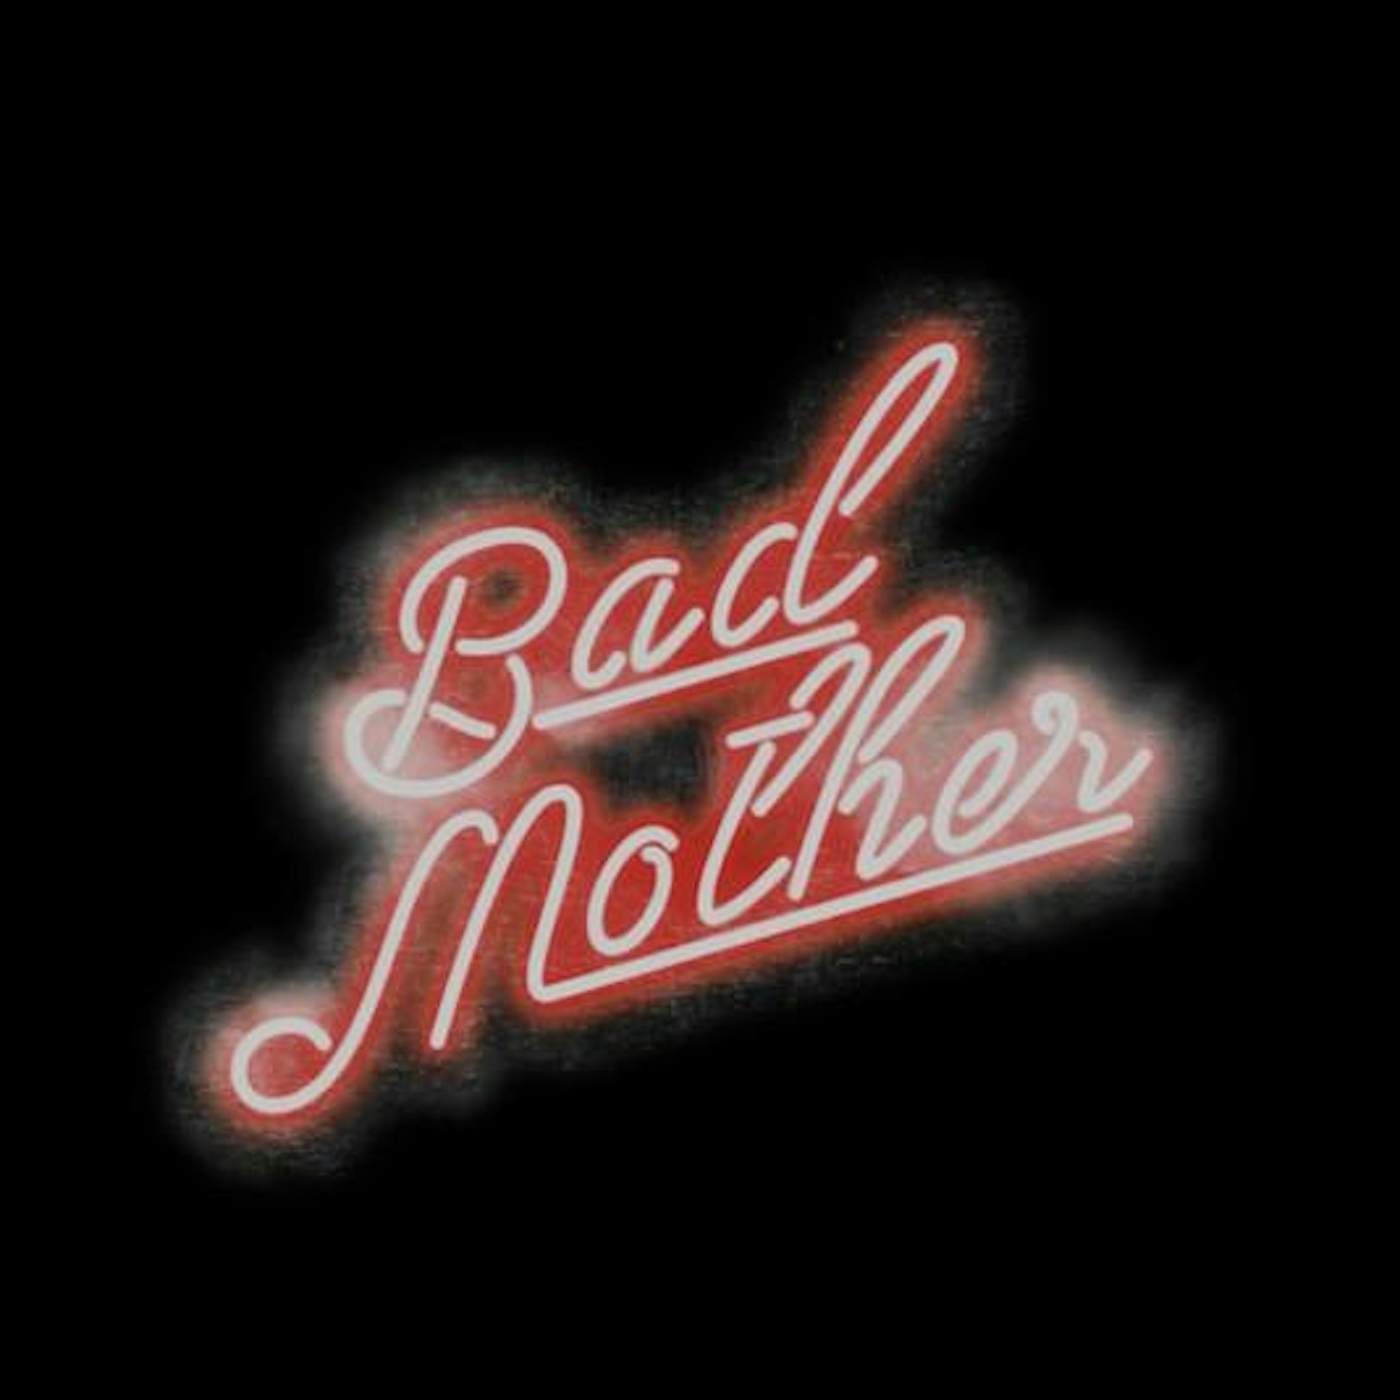 Bad Mother